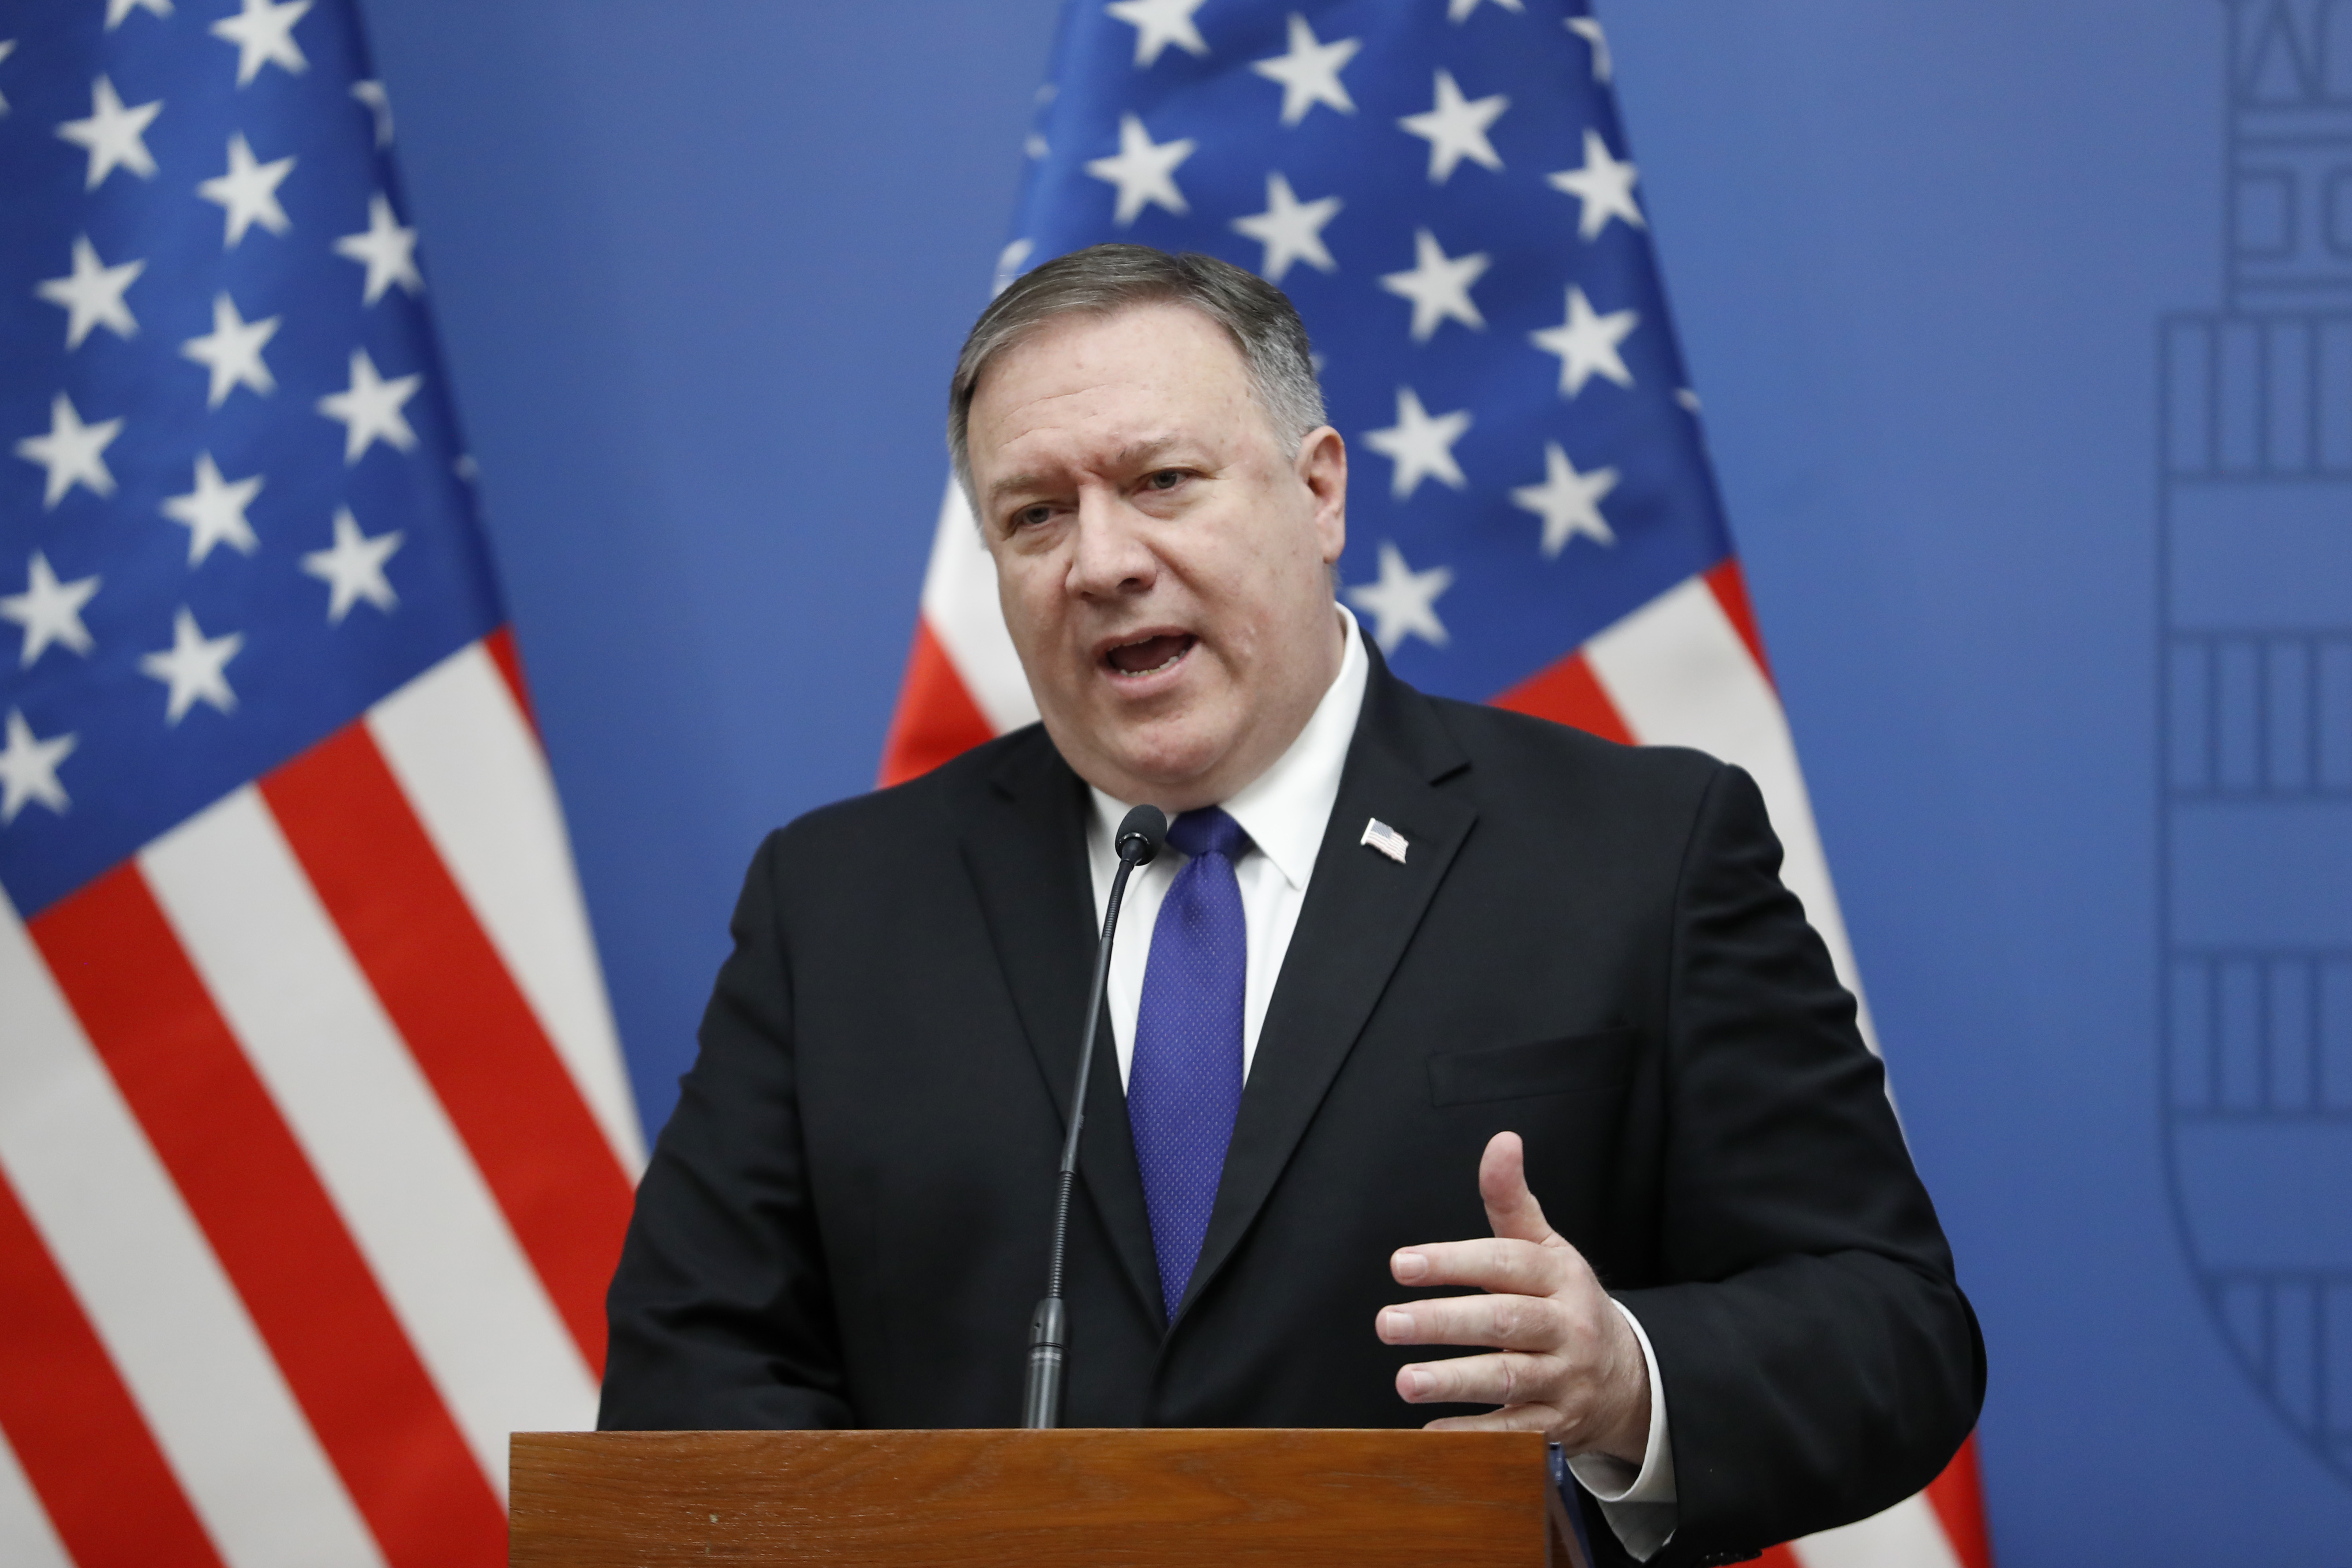 BUDAPEST, HUNGARY – FEBRUARY 11: US Secretary of State Mike Pompeo appears with Hungarian Foreign Minister Peter Szijjarto (not pictured) at the foreign ministry on February 11, 2019 in Budapest, Hungary. They were expected to discuss energy issues and the debate over Huawei, the Chinese telecommunications company whom the U.S. accuses of stealing trade secrets and violating Iran sanctions. Afterward, Secretary Pompeo was scheduled to meet with Hungarian PM Viktor Orban. (Photo by Laszlo Balogh/Getty images)